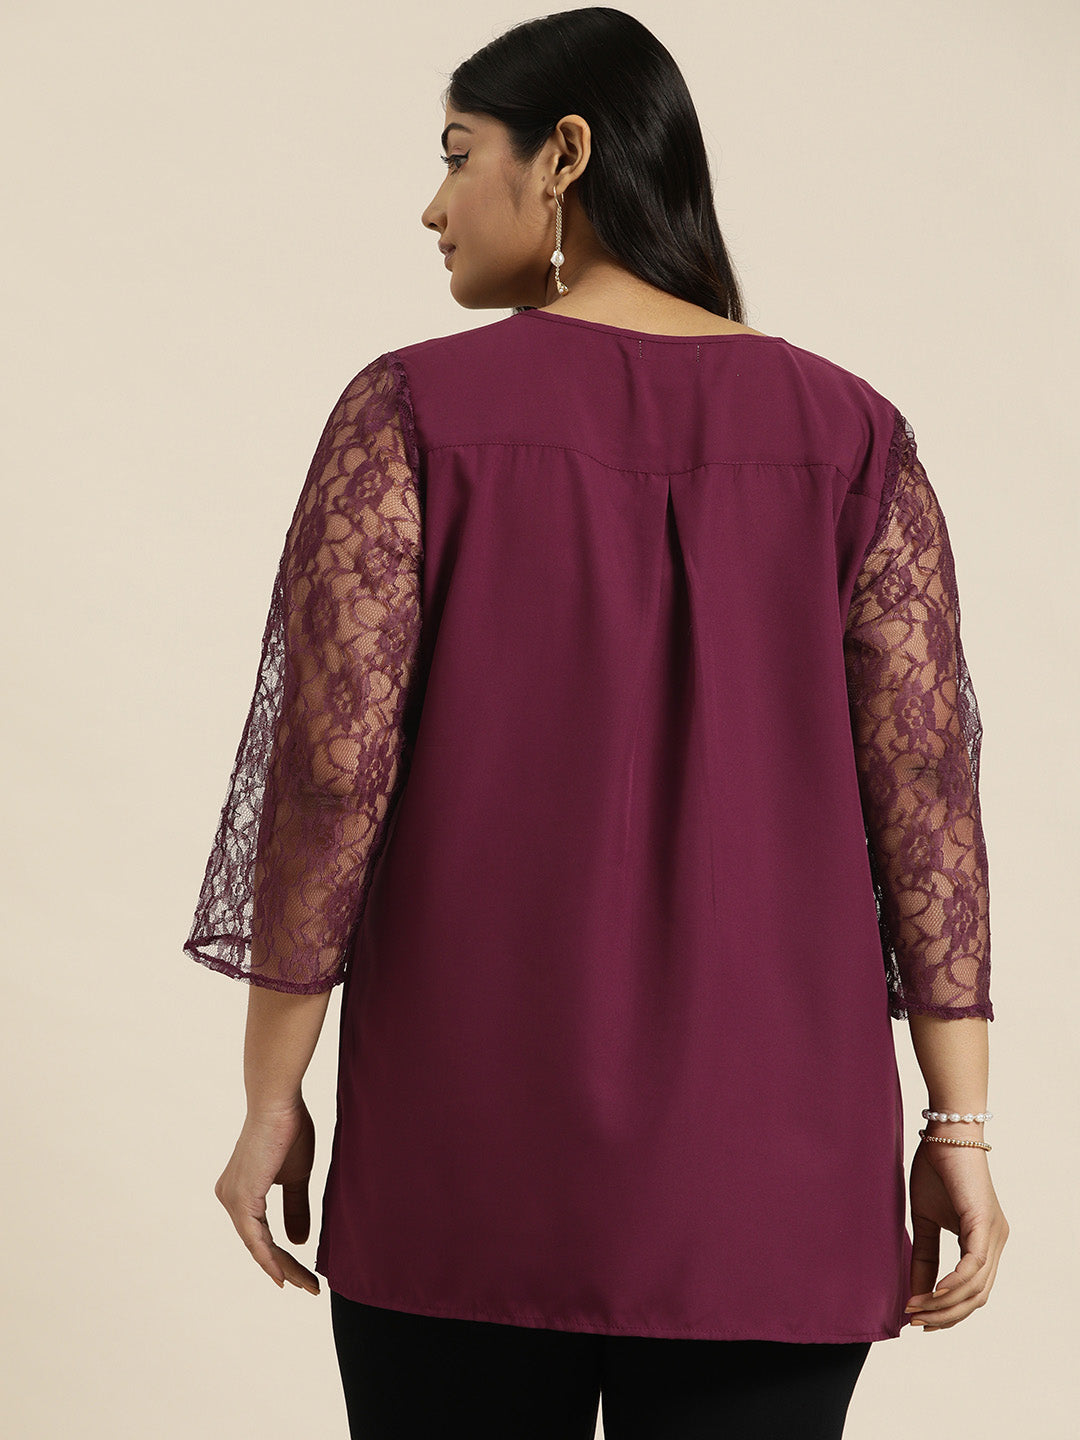 Flowy Wine floral net crepe tunic top